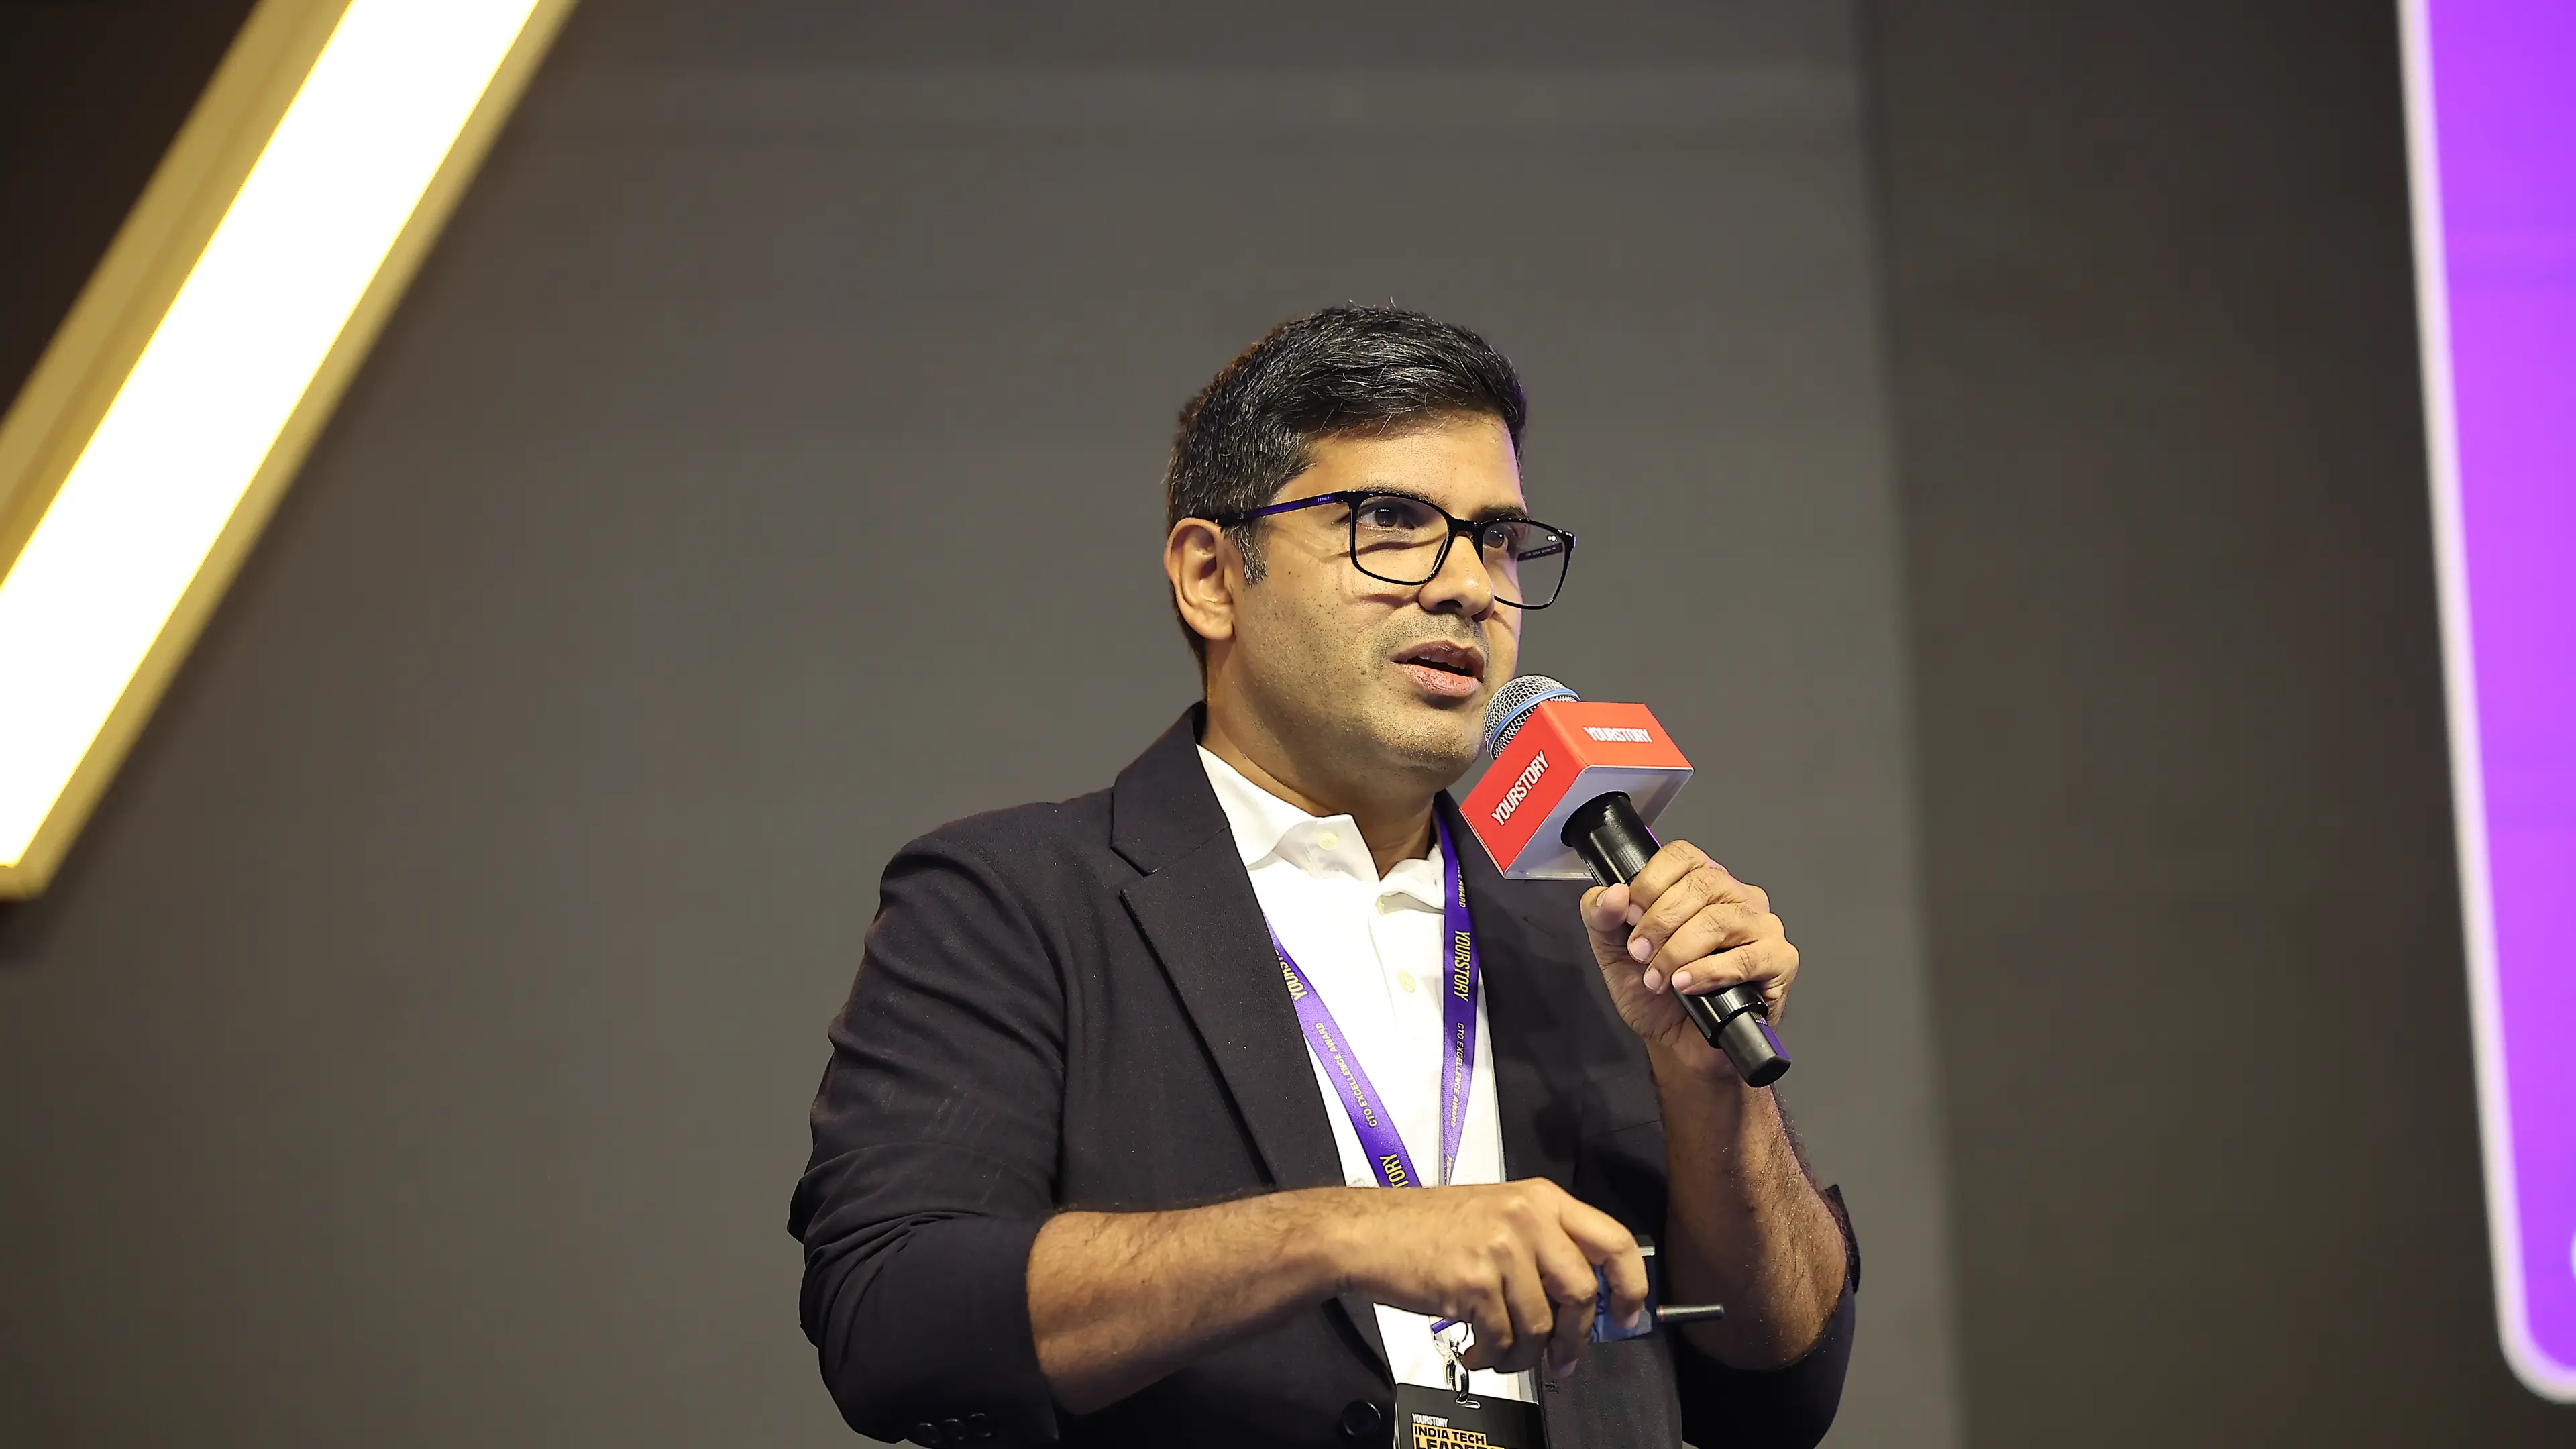 Building for Bharat: PhonePe CTO Rahul Chari on leveraging tech for billion-plus impact